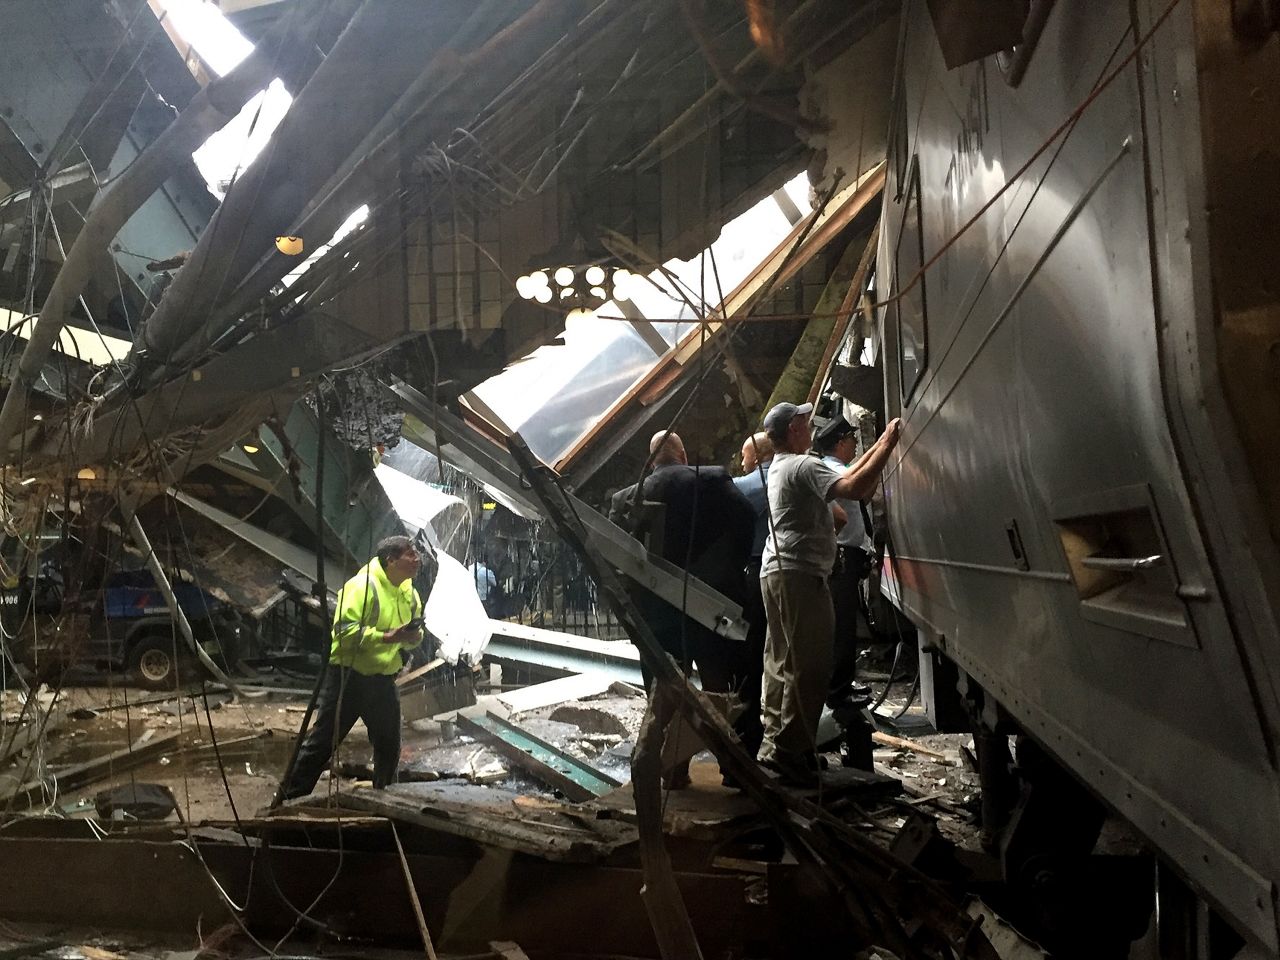 Emergency workers and others survey the train after the crash.